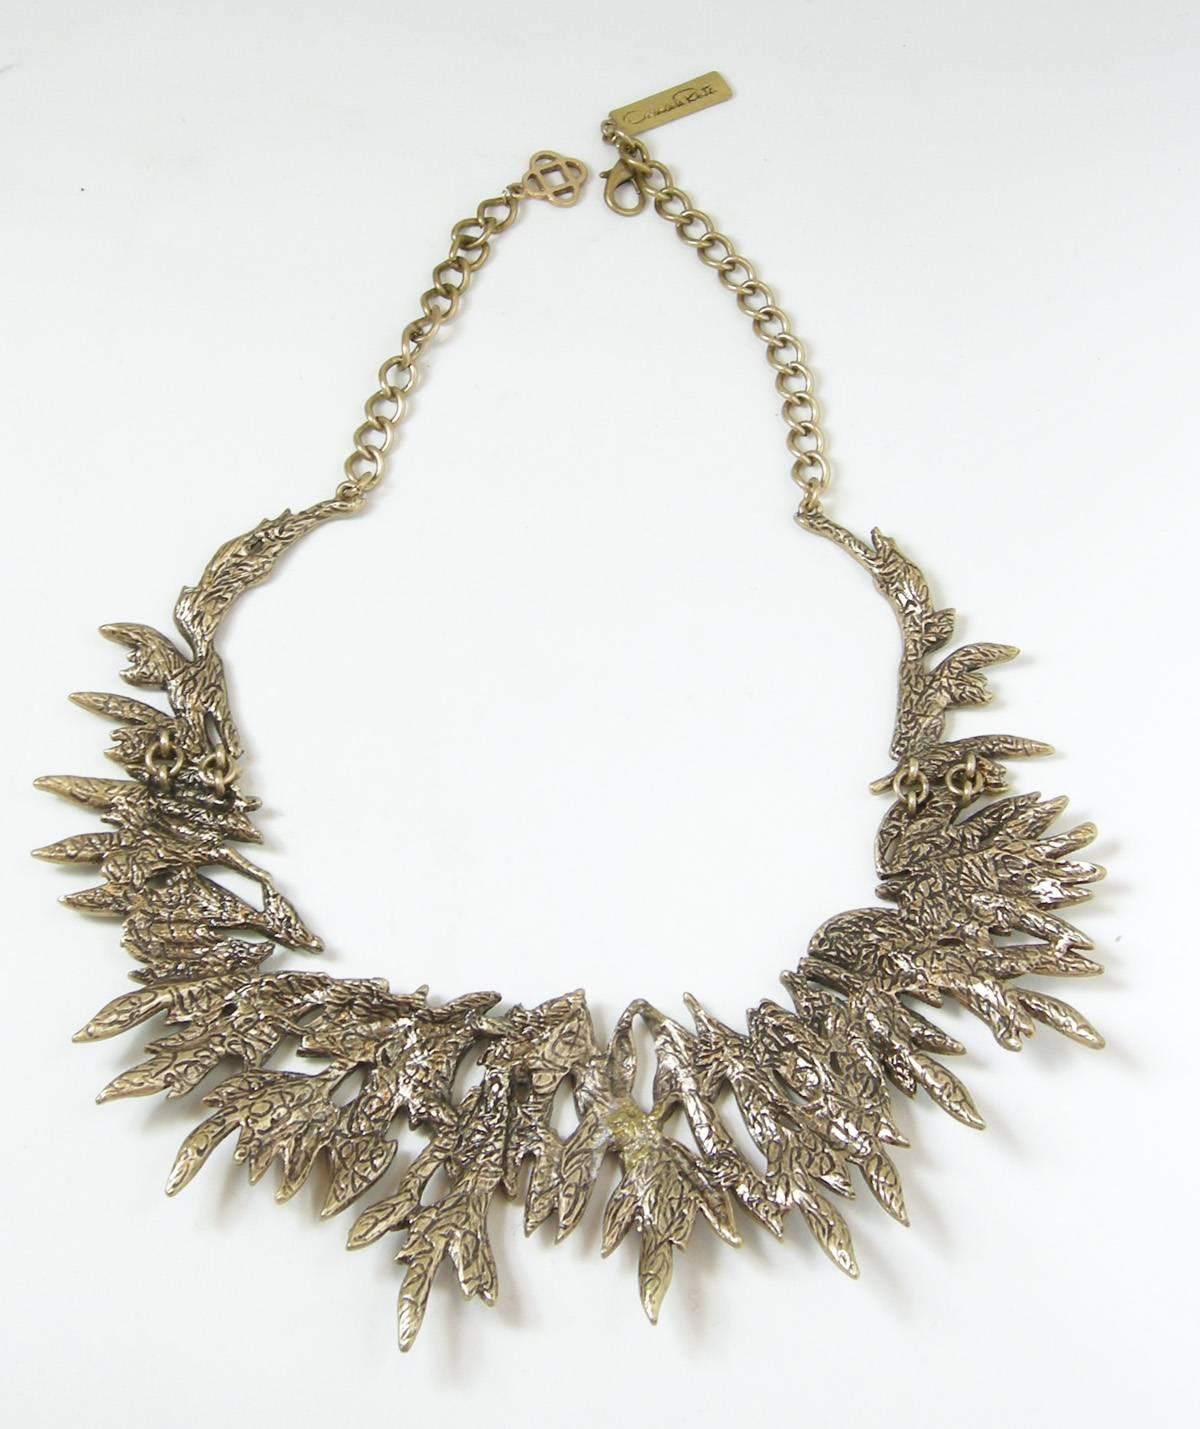 Ethereal and elegant this statement necklace features an intricate motif of cascading Austrian crystals leaves in a mixed silver/gold-tone setting. It is simply dazzling with its fabulous pave crystal leaves. The necklace is very flexible and is